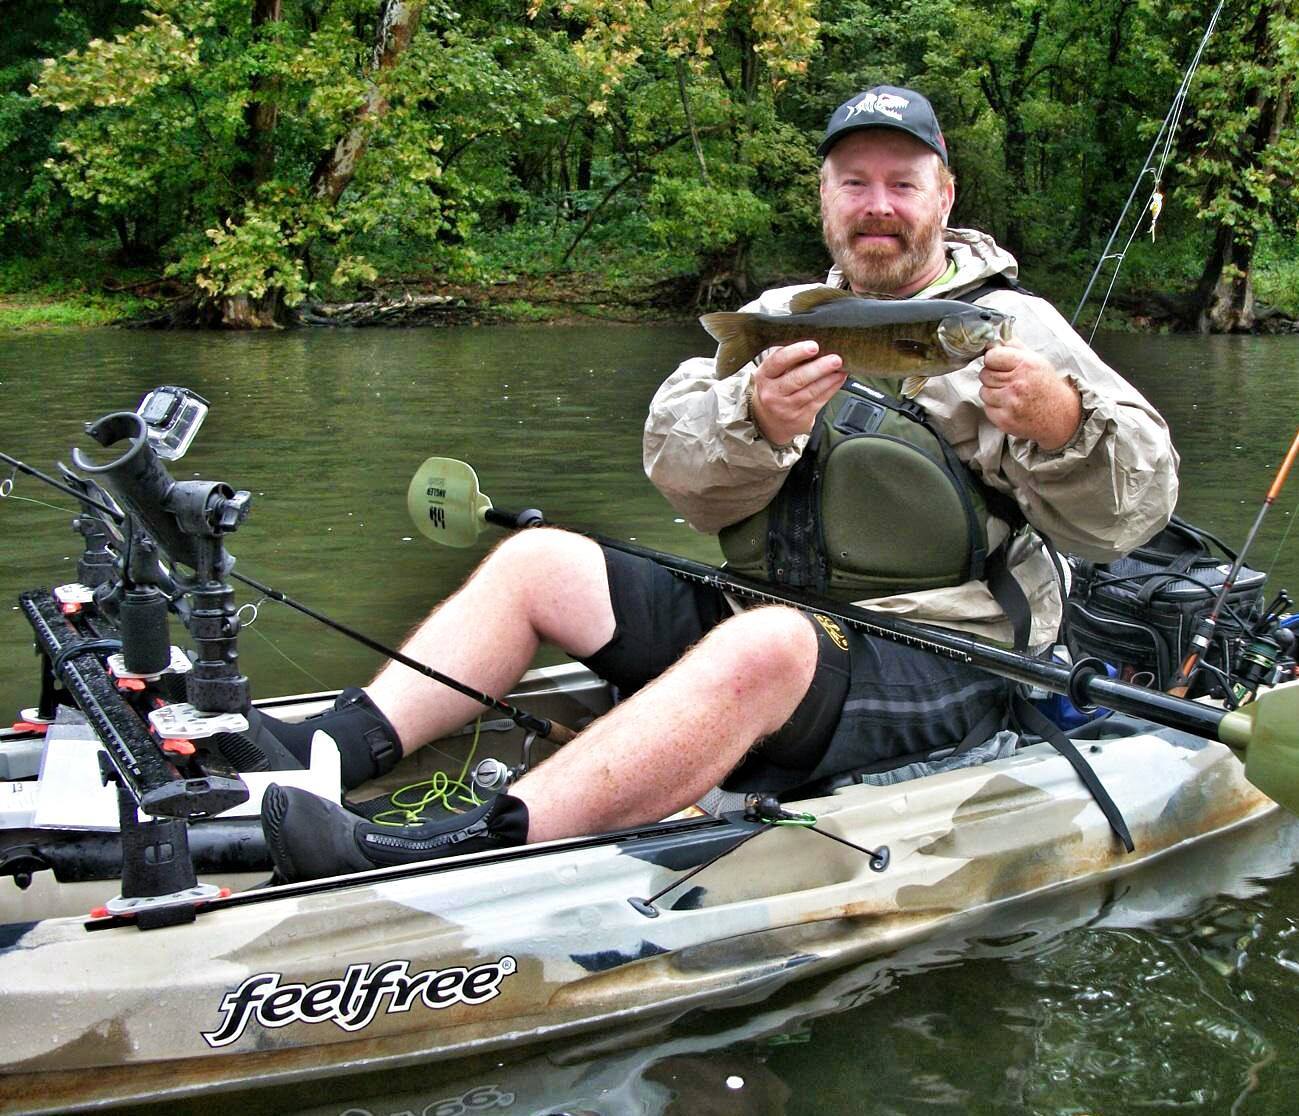 Product Review - Uni-Bar: Your Personal Kayak Fishing Command